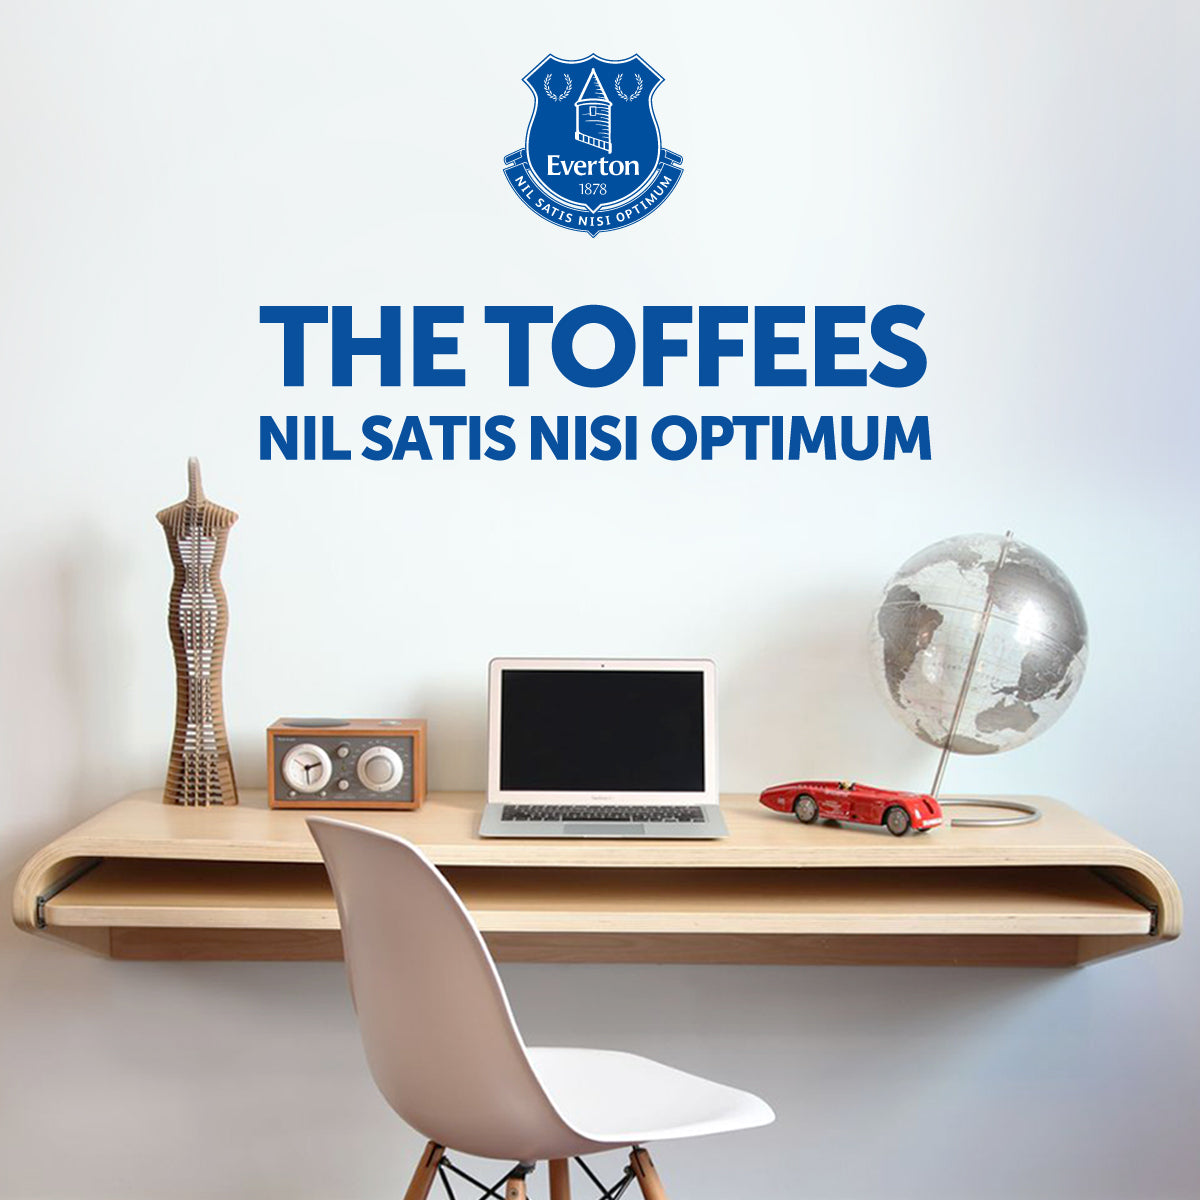 Everton The Toffees Crest Design Wall Sticker